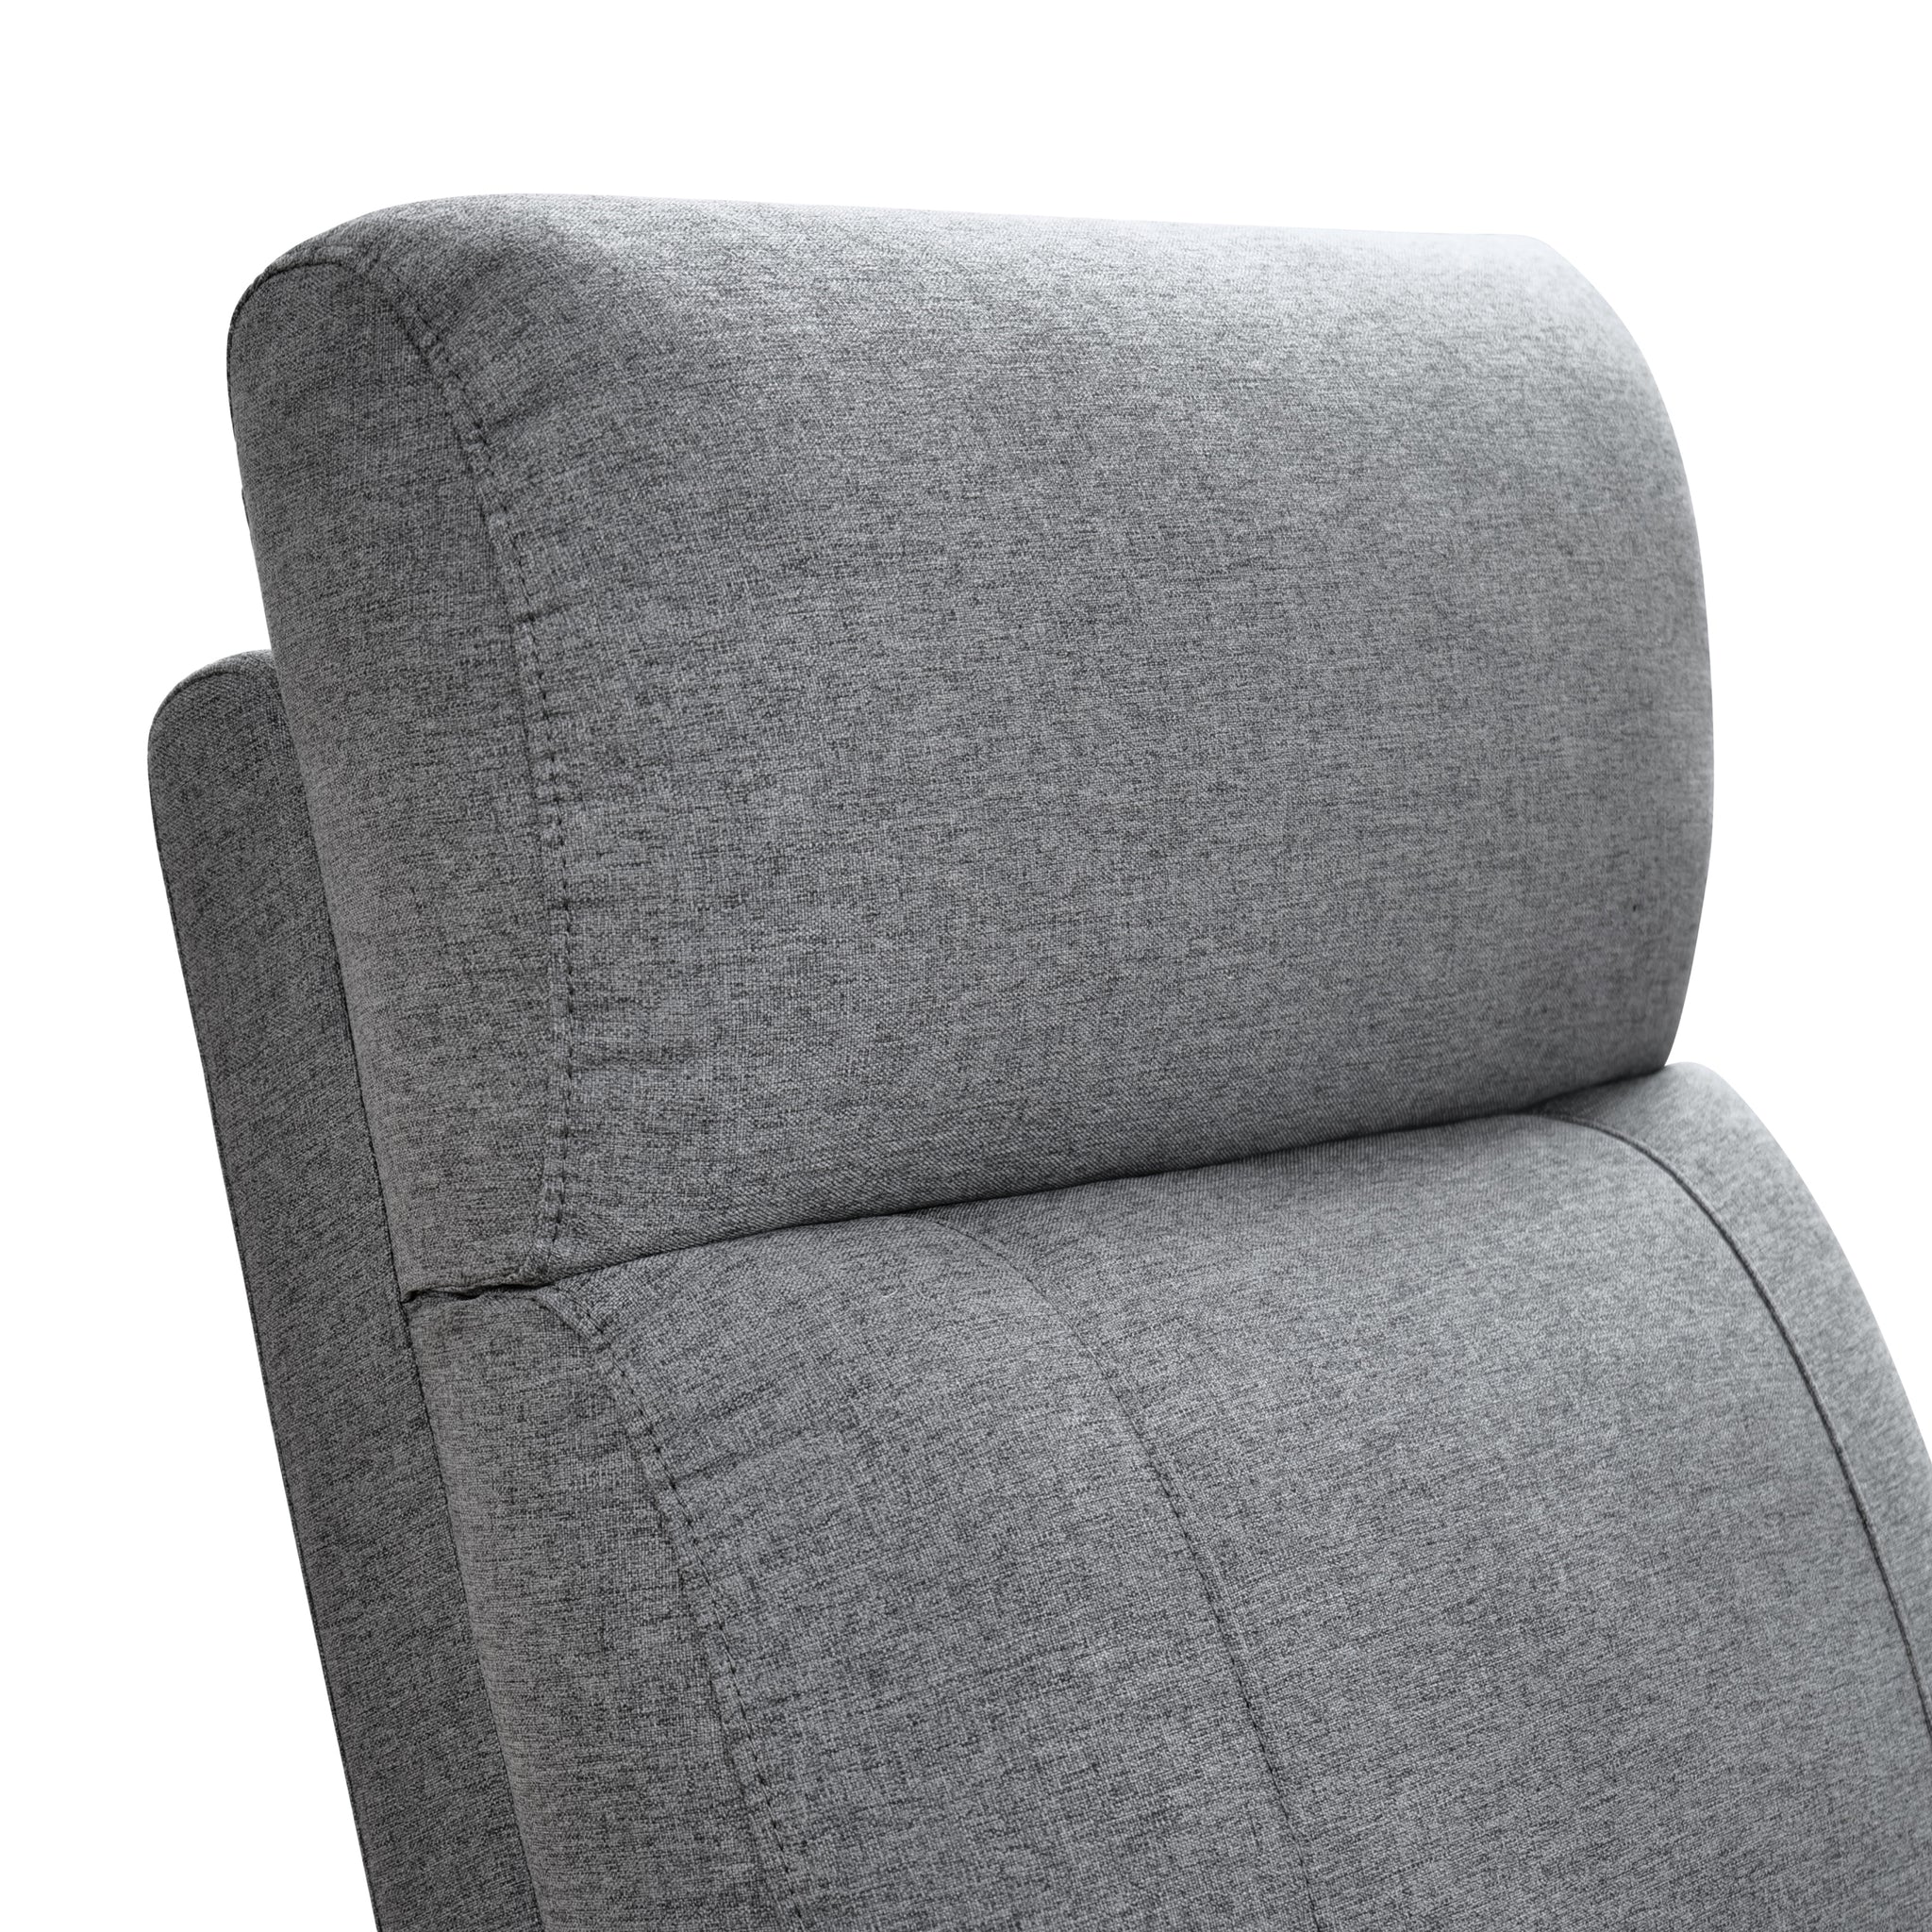 Verona Power Recliner with USB Charger gray-fabric